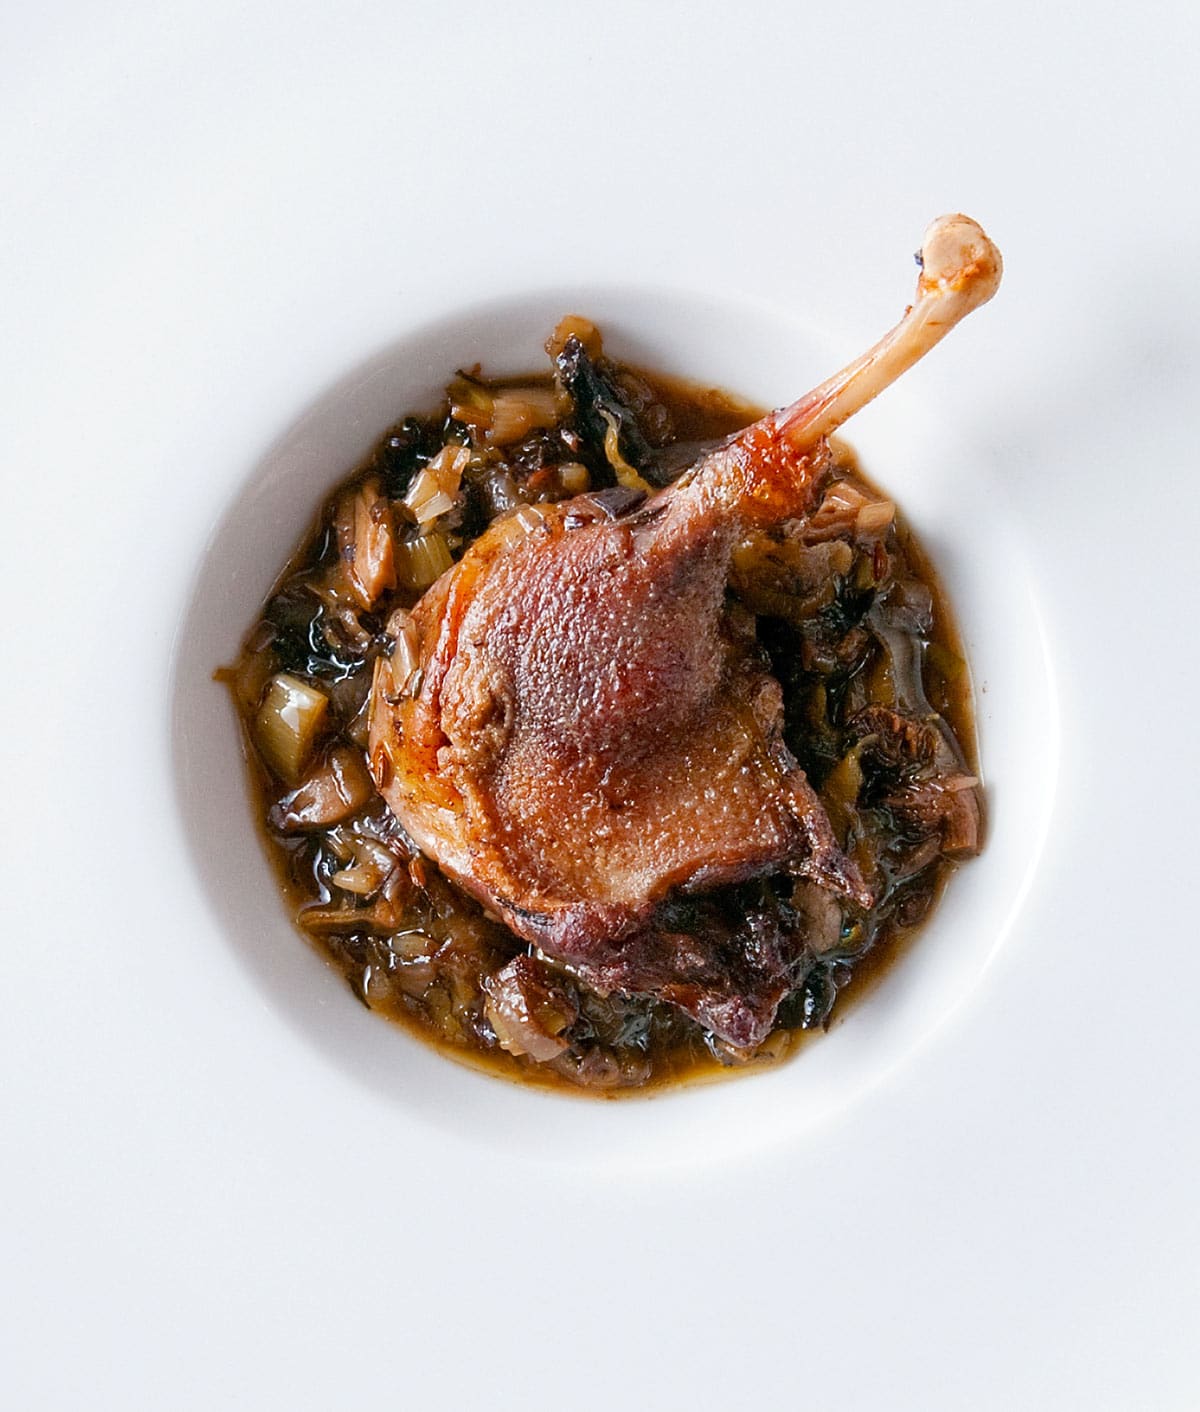 Braised duck legs over a bed of mushrooms and leeks. 